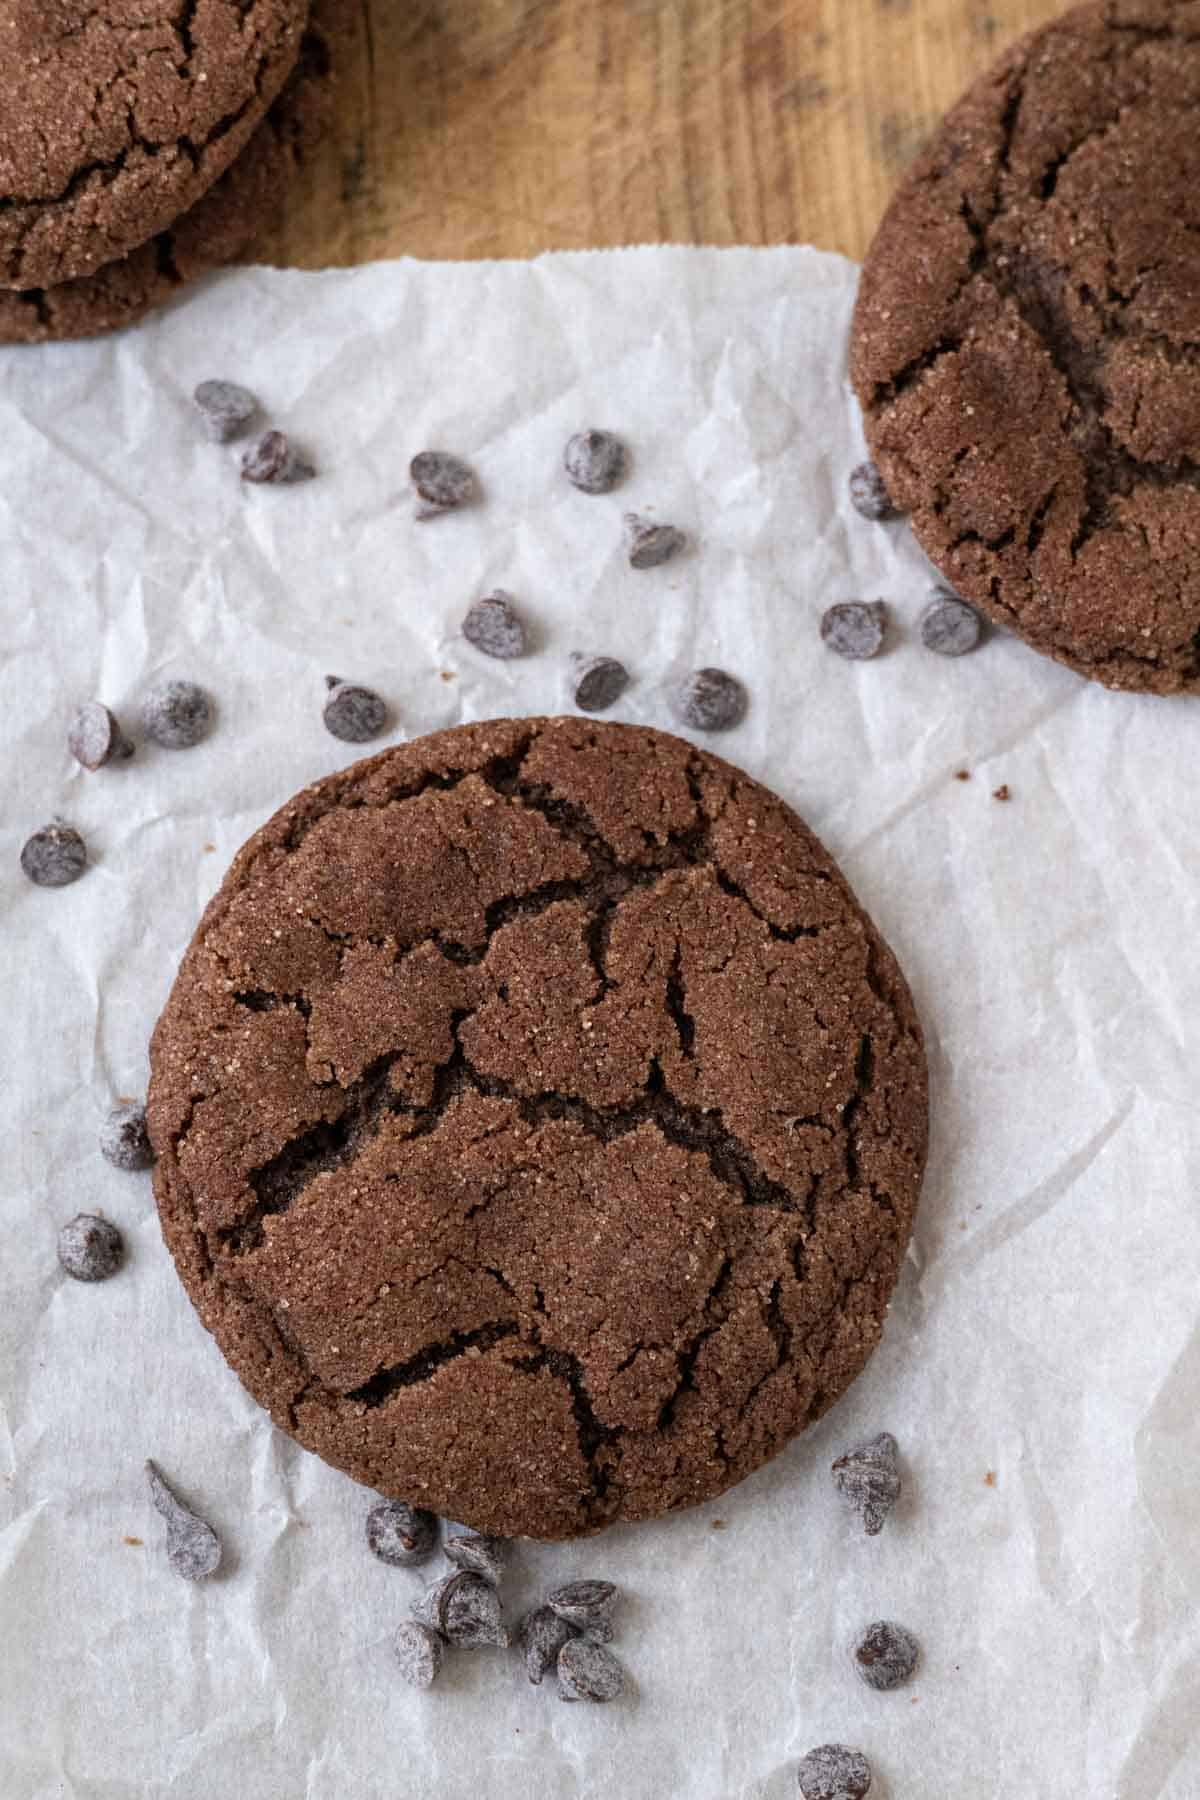 Chocolate Cinnamon Snickerdoodles on a white with chocolate chips scattered around.